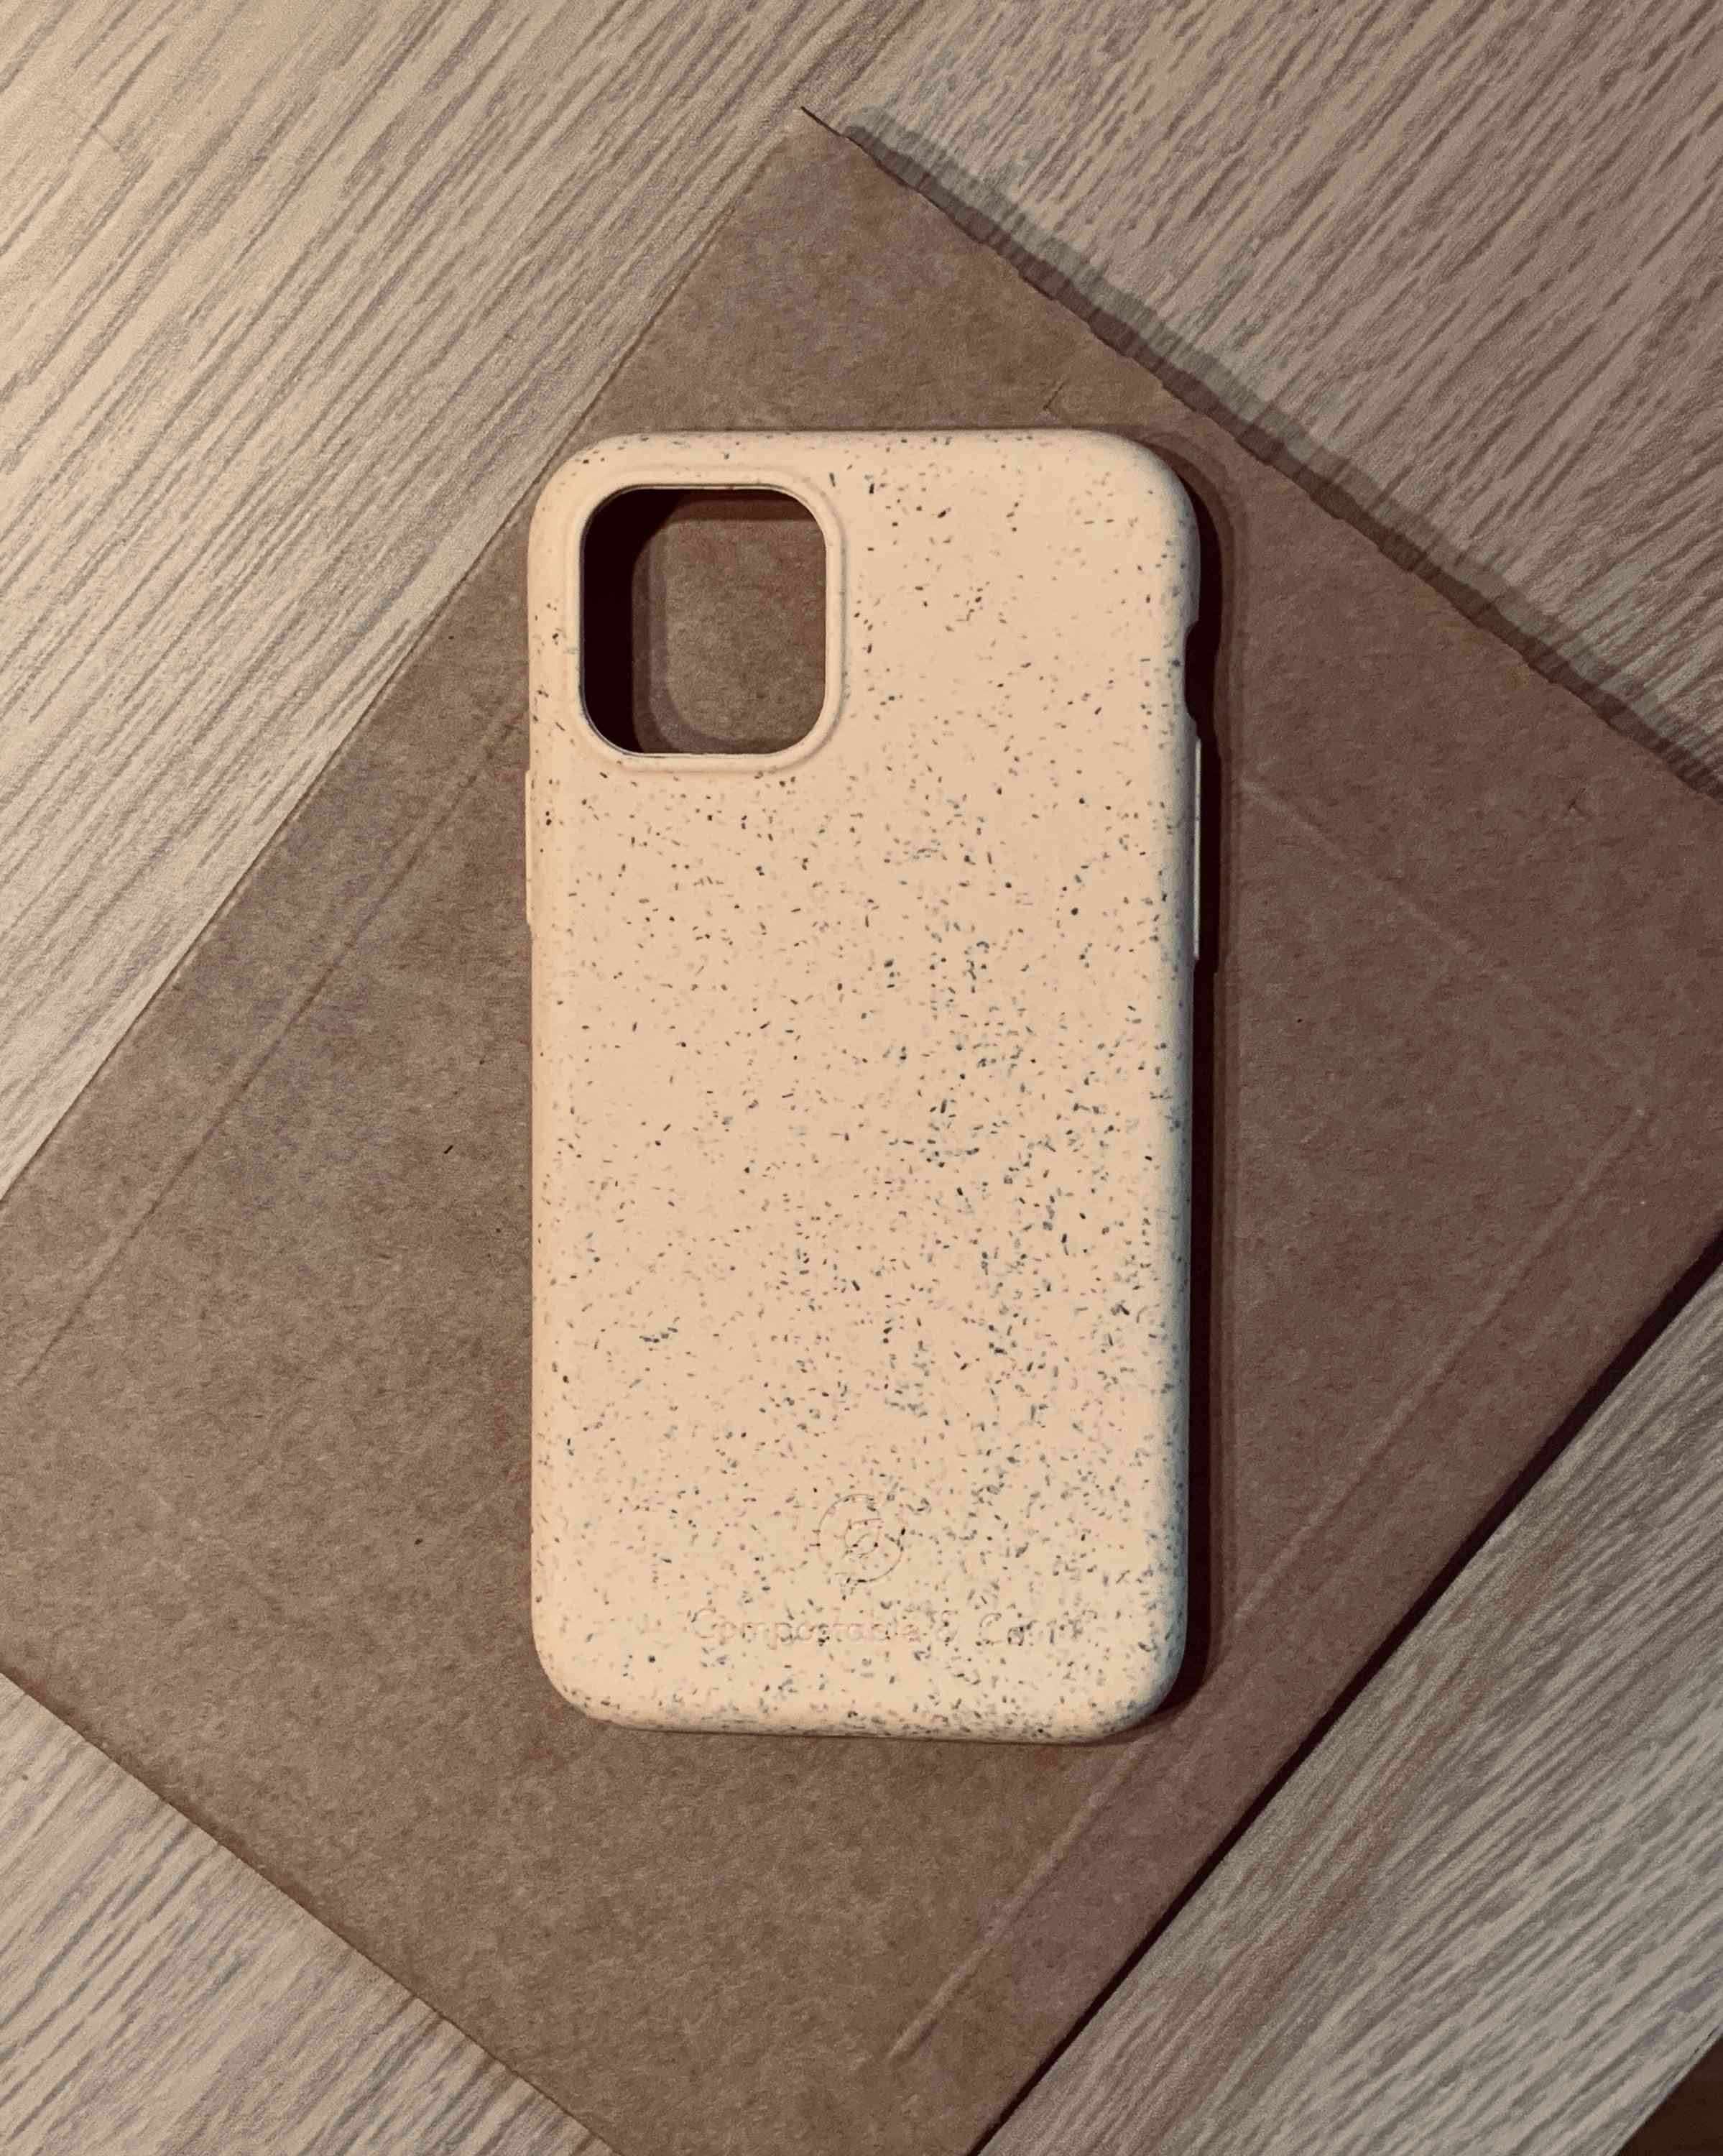 Compostable And Biodegradable Iphone 11 Case